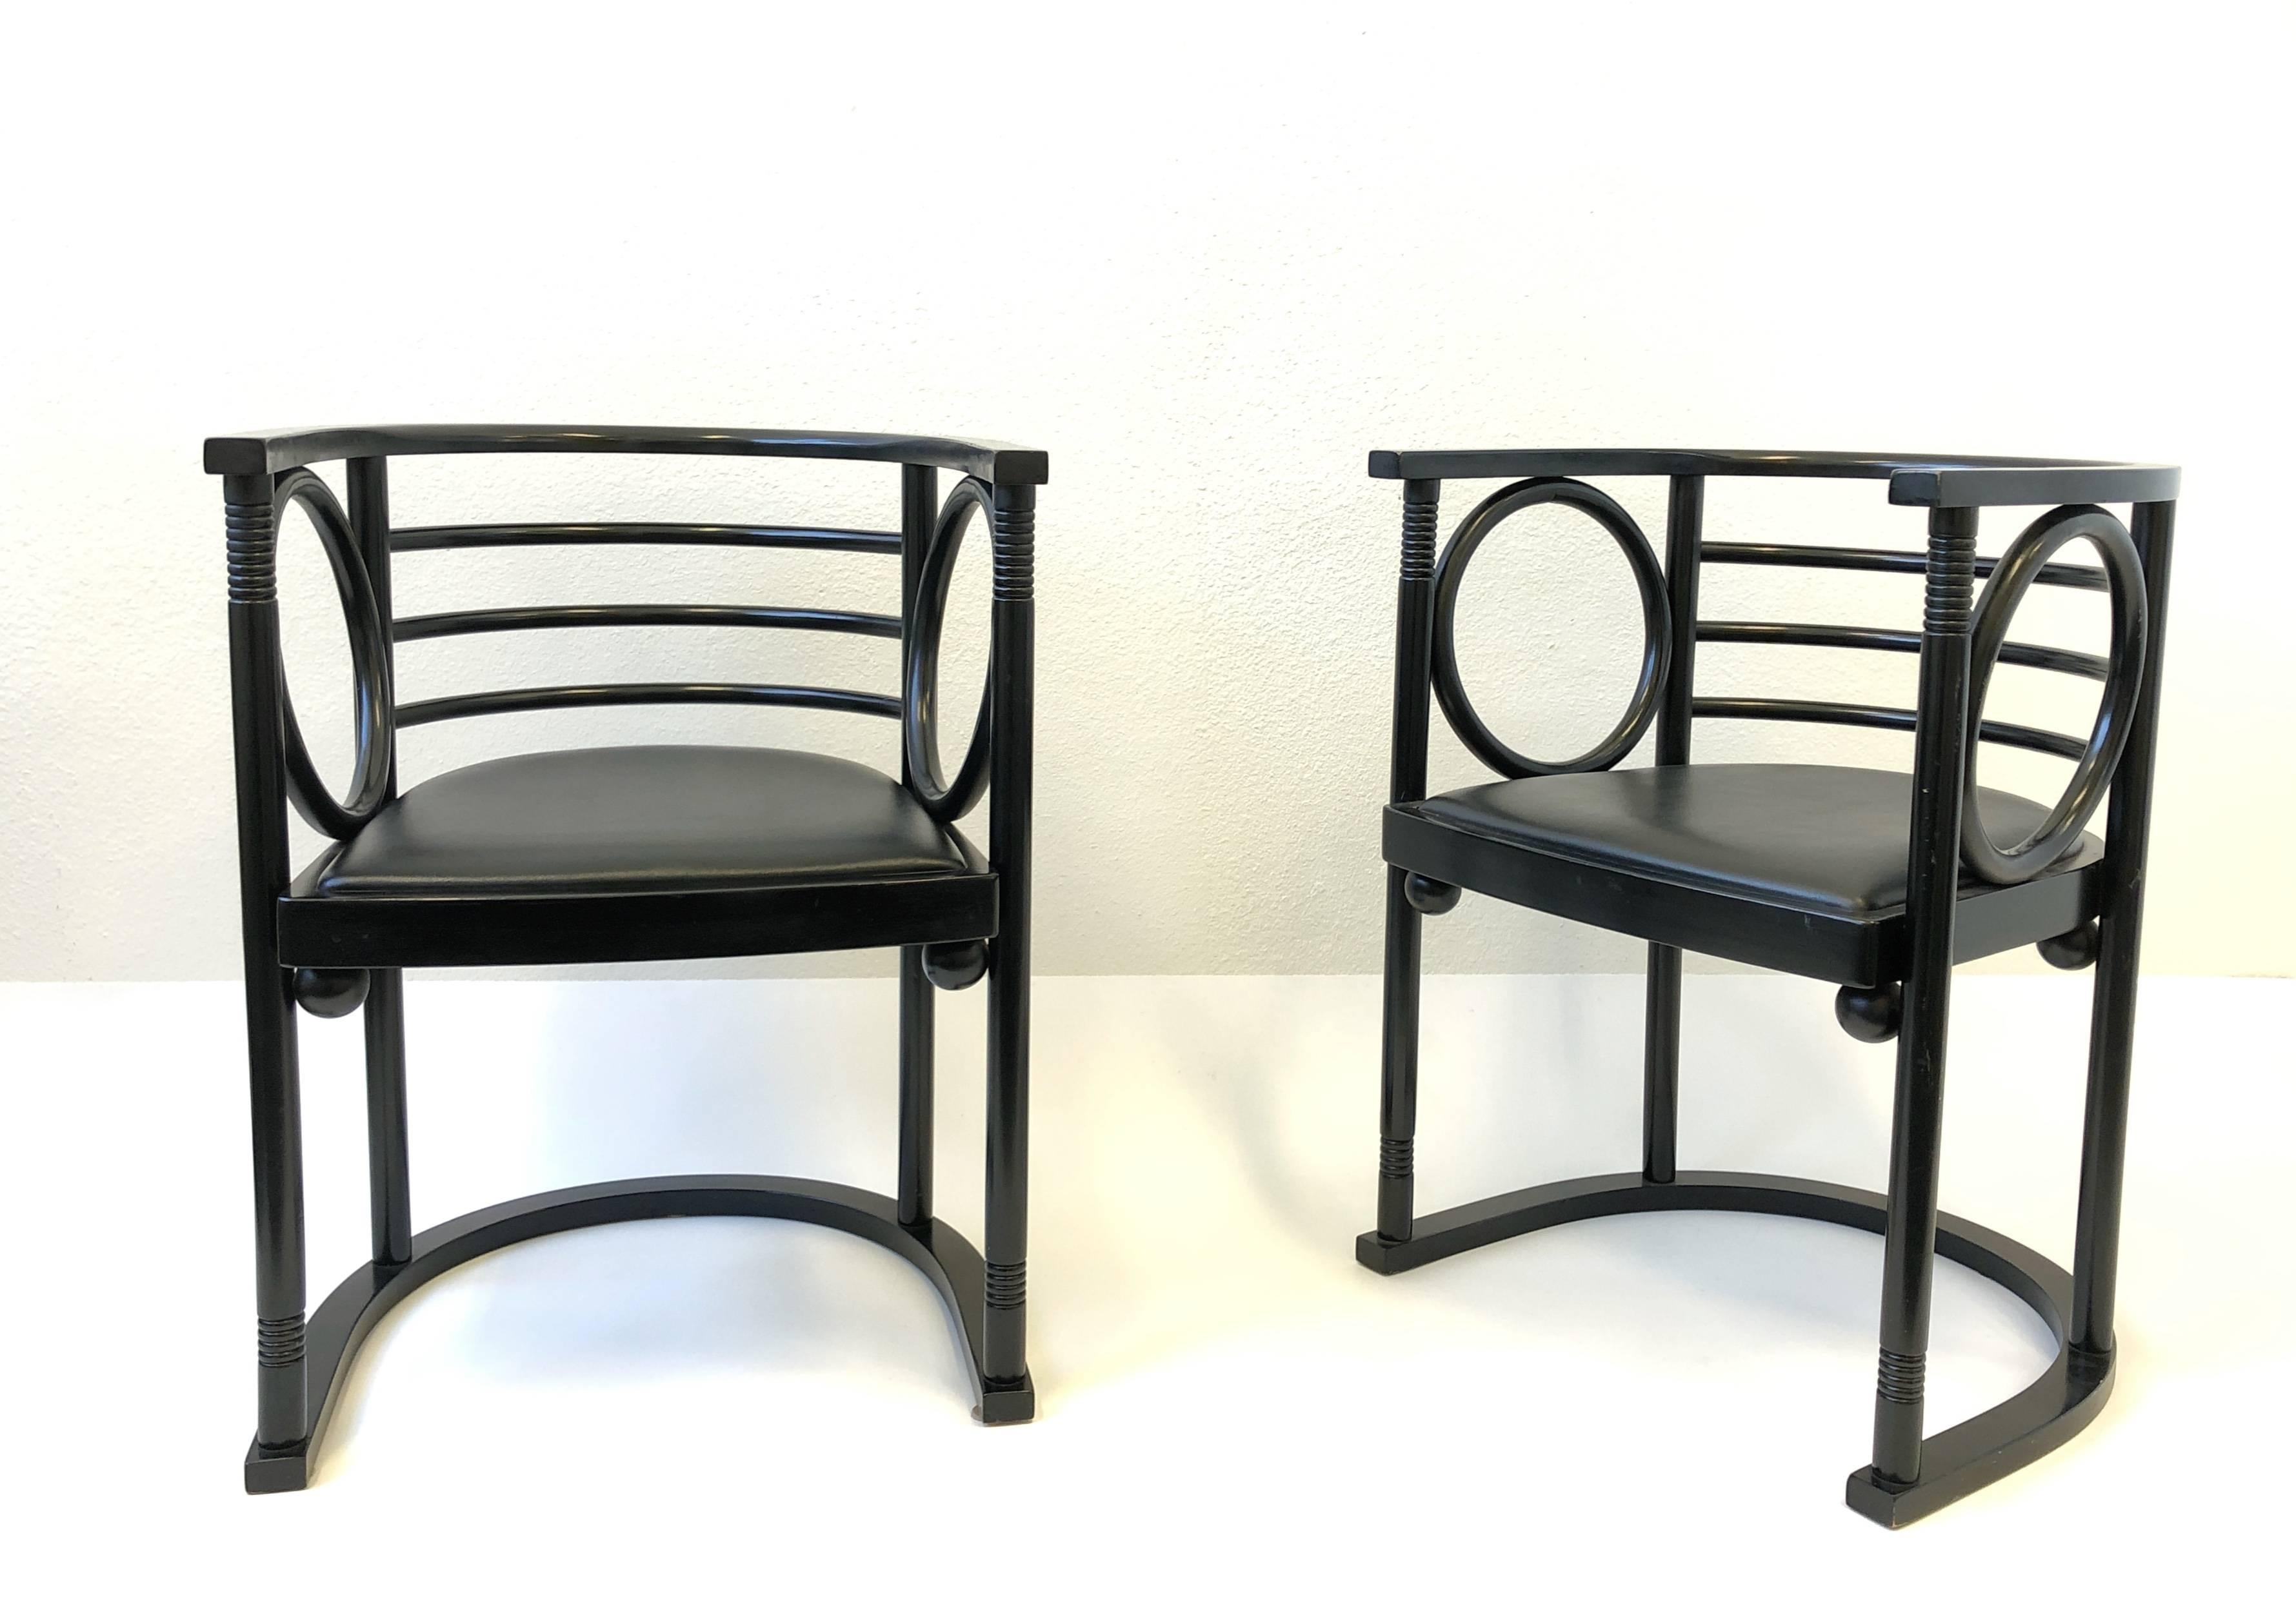 A beautiful pair of black lacquer armchairs by Josef Hoffman for Thonet.
This were originally designed in the early 1900s. This are manufactured by Thonet in the 1980s. This are in original condition the seat is covered with a black